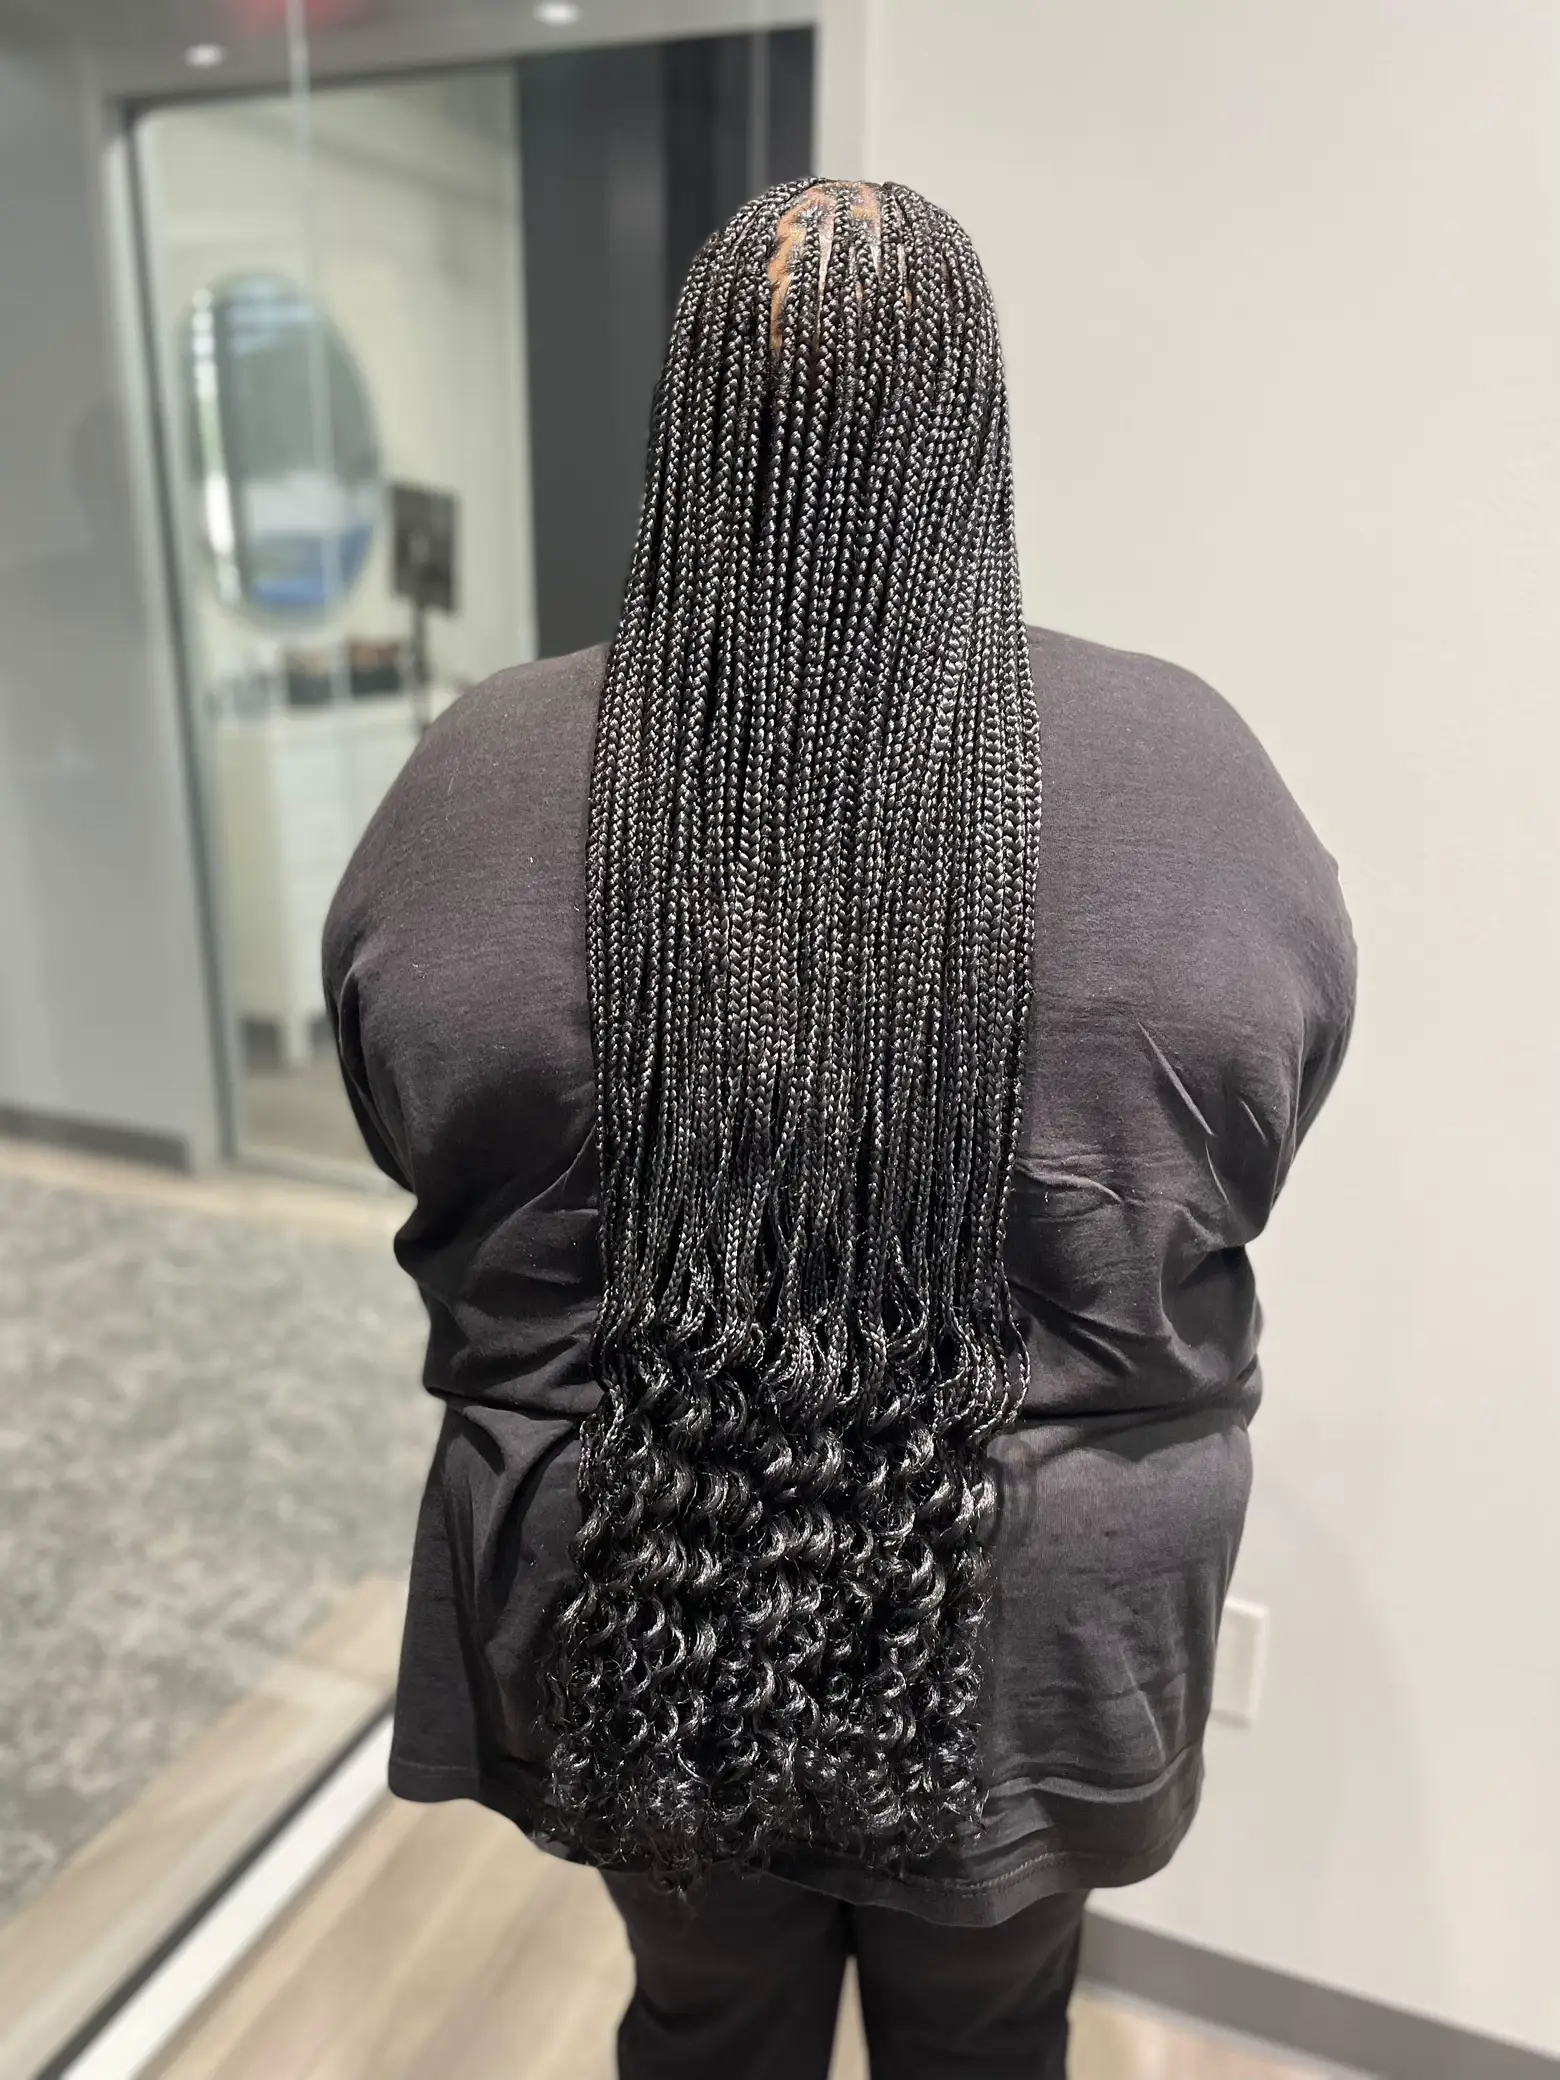 Knotless braids, Gallery posted by Mandy